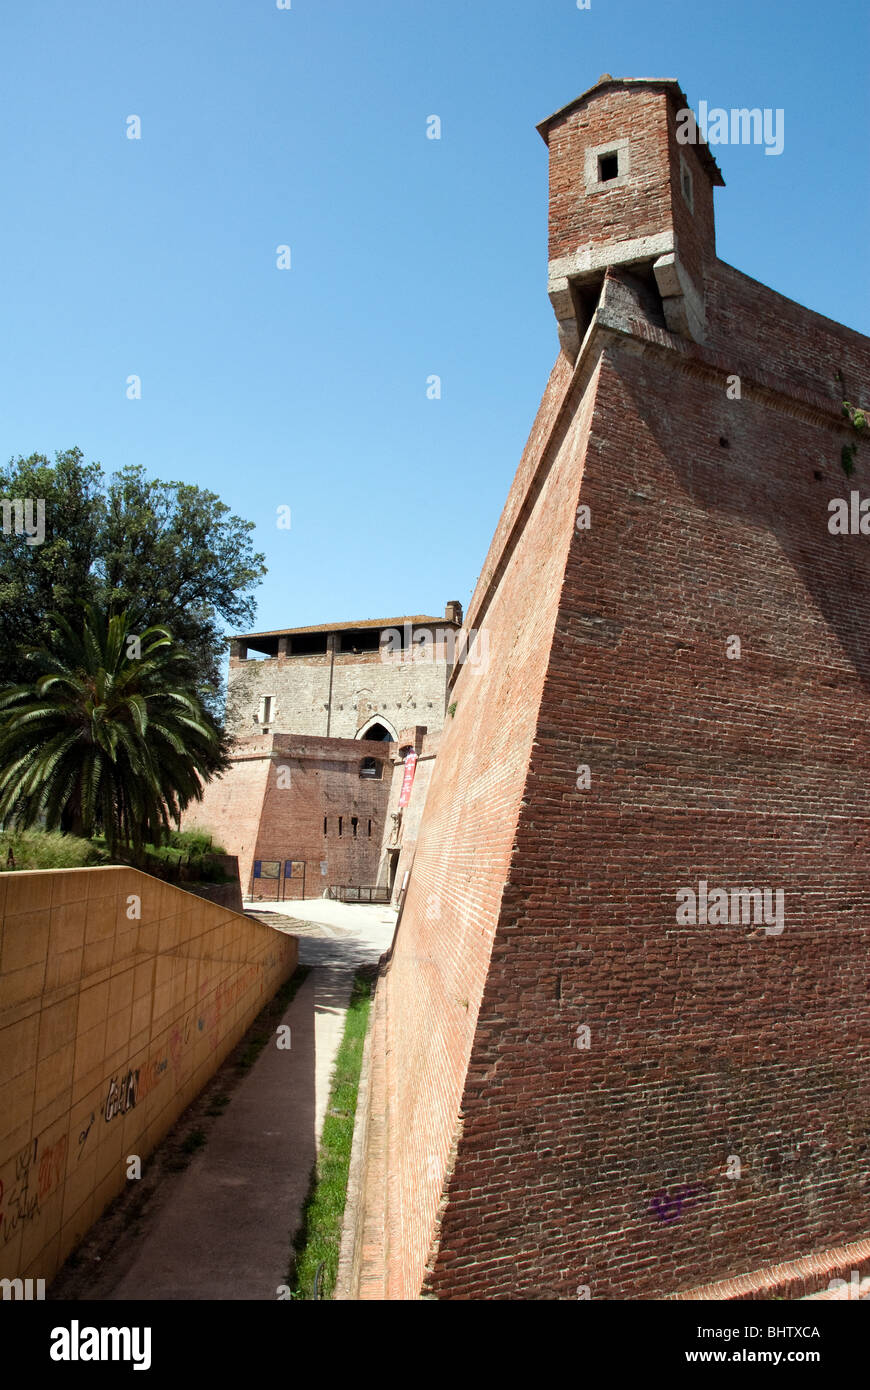 Guards house on the walls of the Medici Fortress in the town of Grosseto, Italy Stock Photo